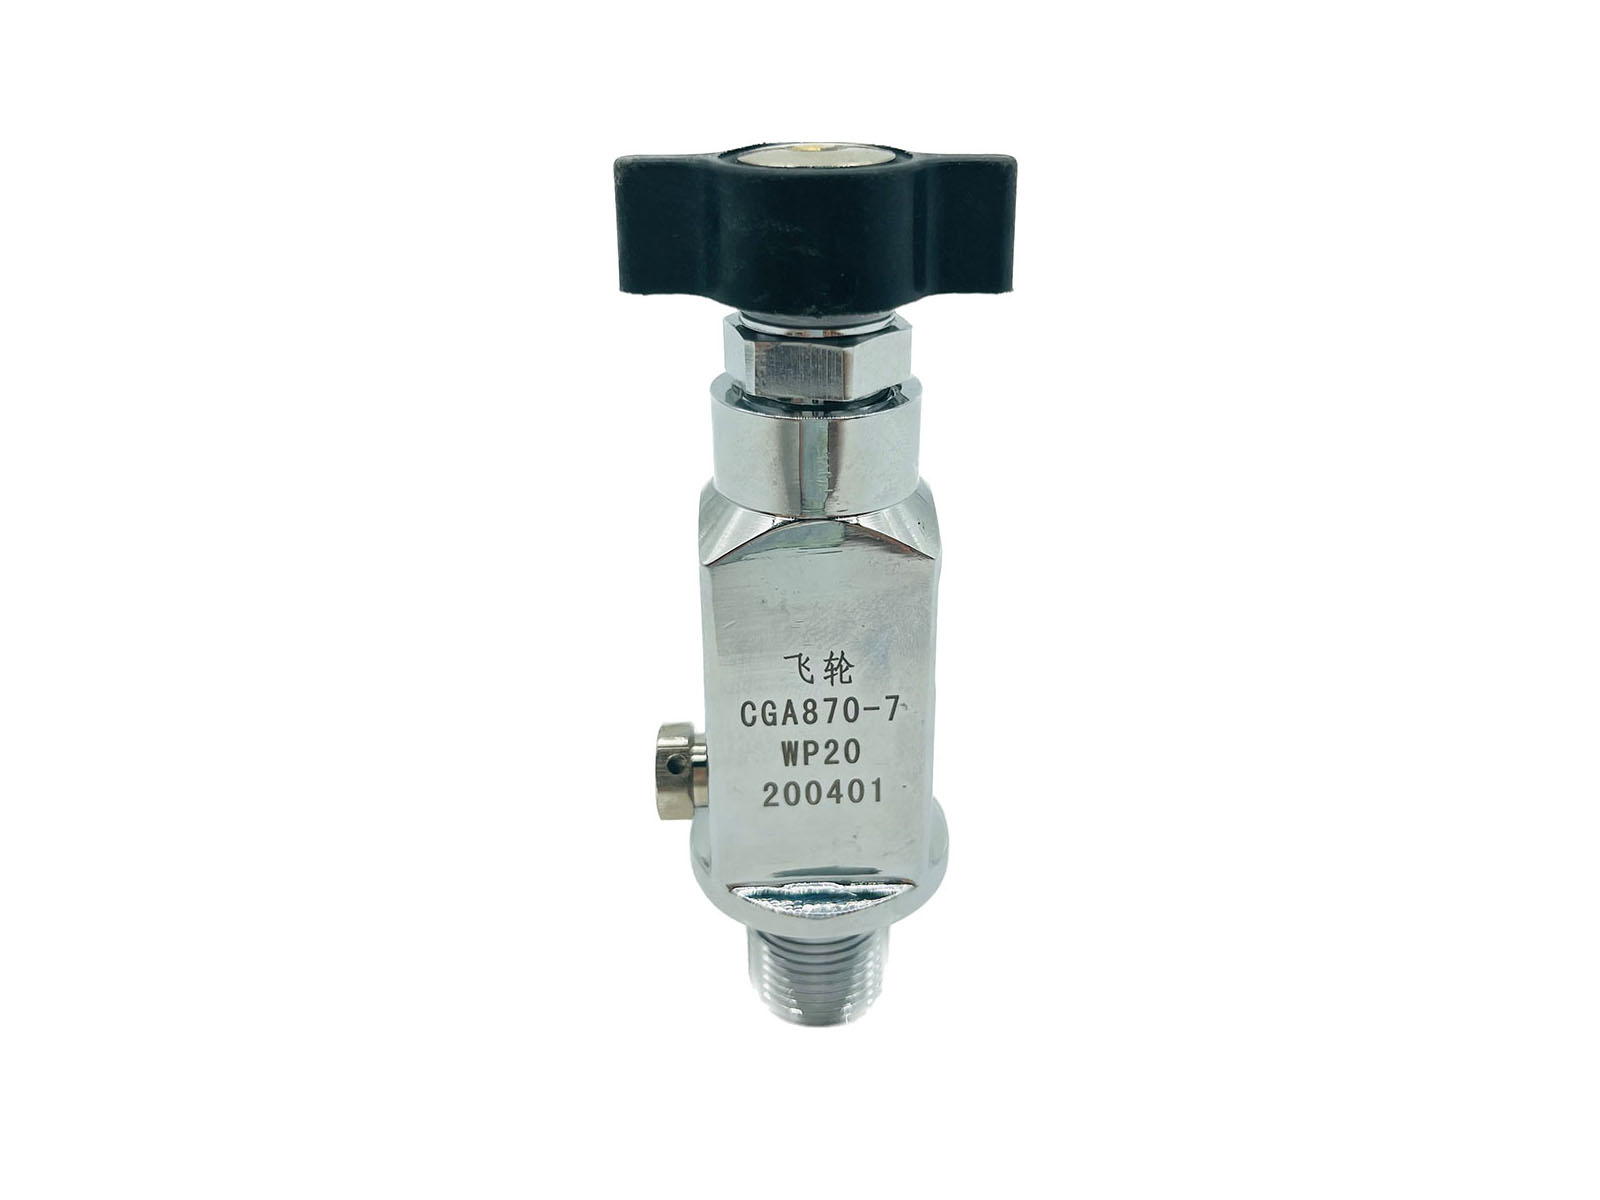 Medical Oxygen Valves: Essential Components in Healthcare Facilities